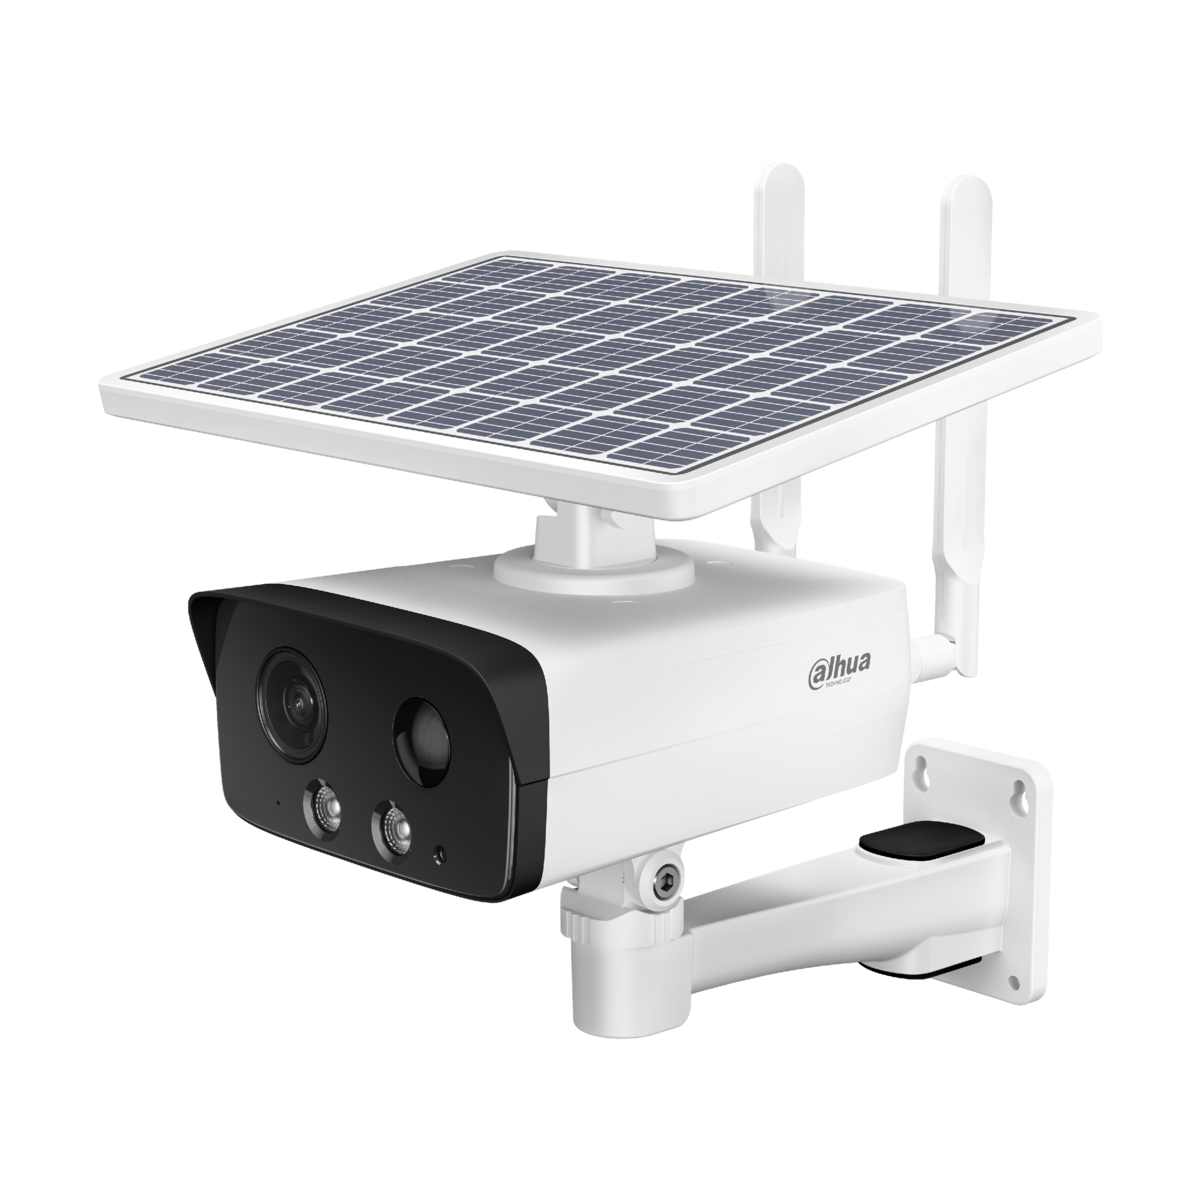 LITE SERIES IP CAMERA WHITE 4G WITH SOLAR 4MP H.264/5 BULLET 120 WDR PLASTIC/METAL 2.8MM FIXED LENS STARLIGHT IR+WHITE LED 30M IP67 BUILT IN MIC SUPPORT UP TO 256GB SD IK10 5VDC